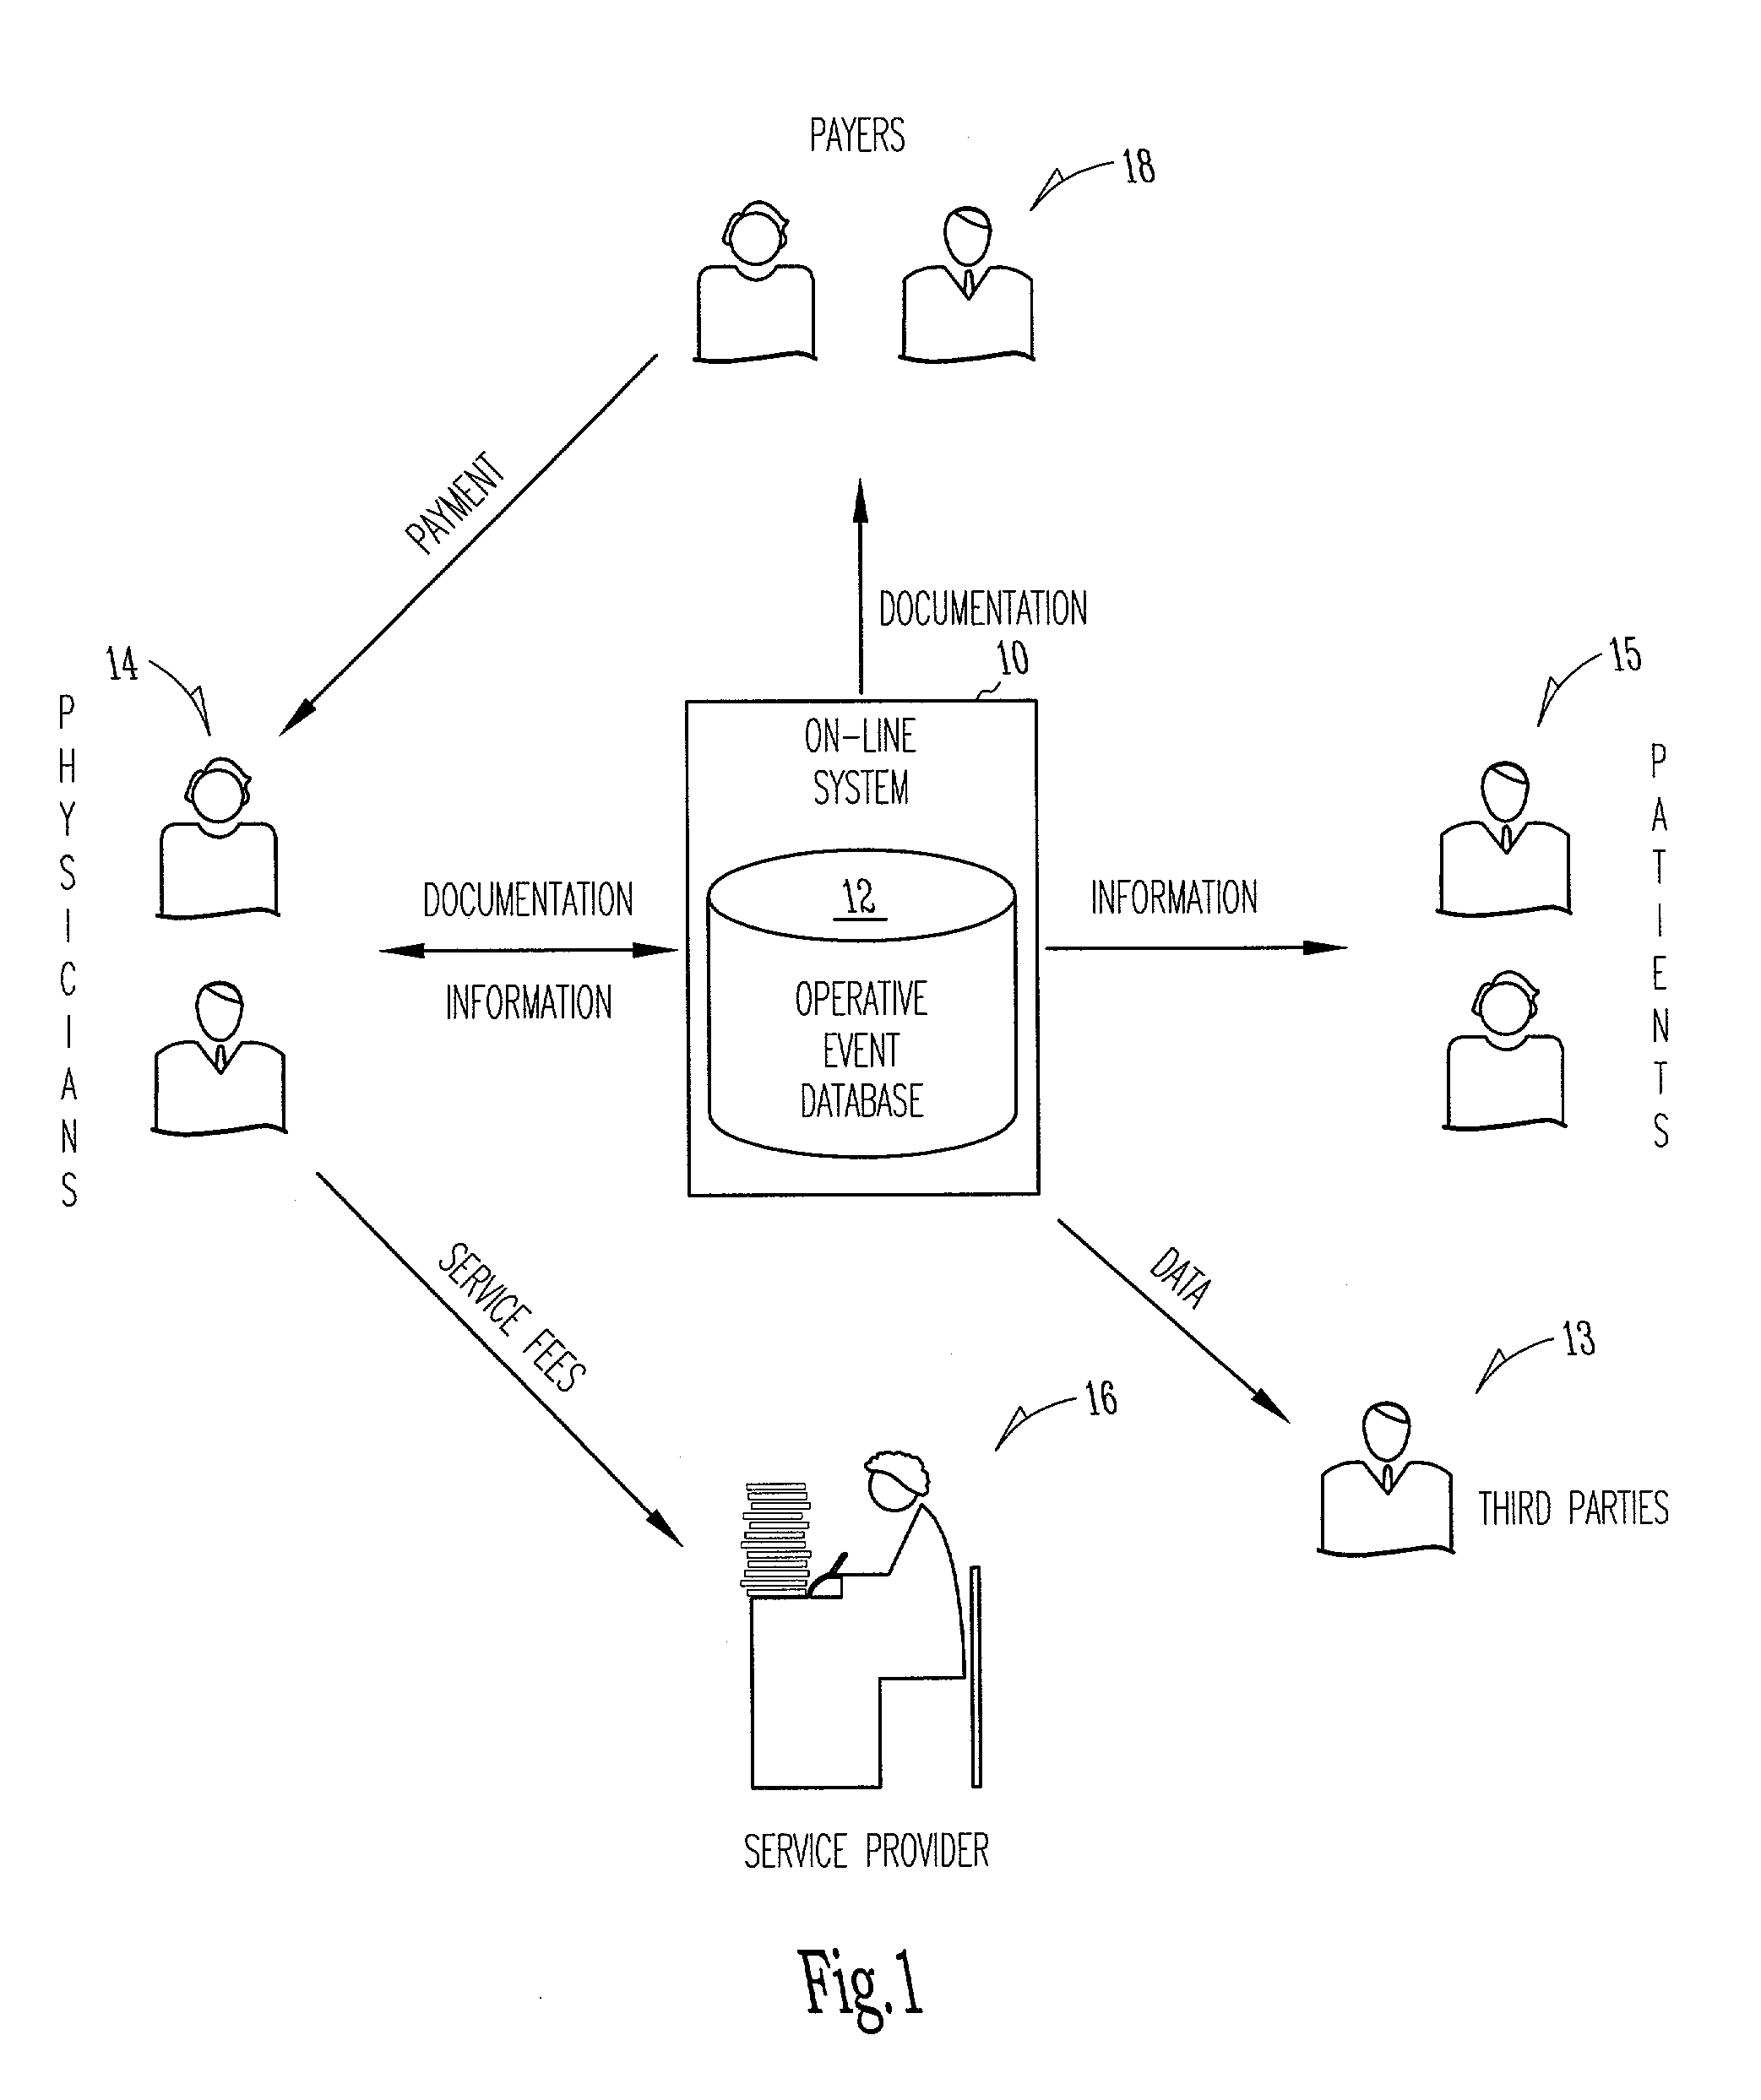 Method and apparatus for operative event documentation and related data management